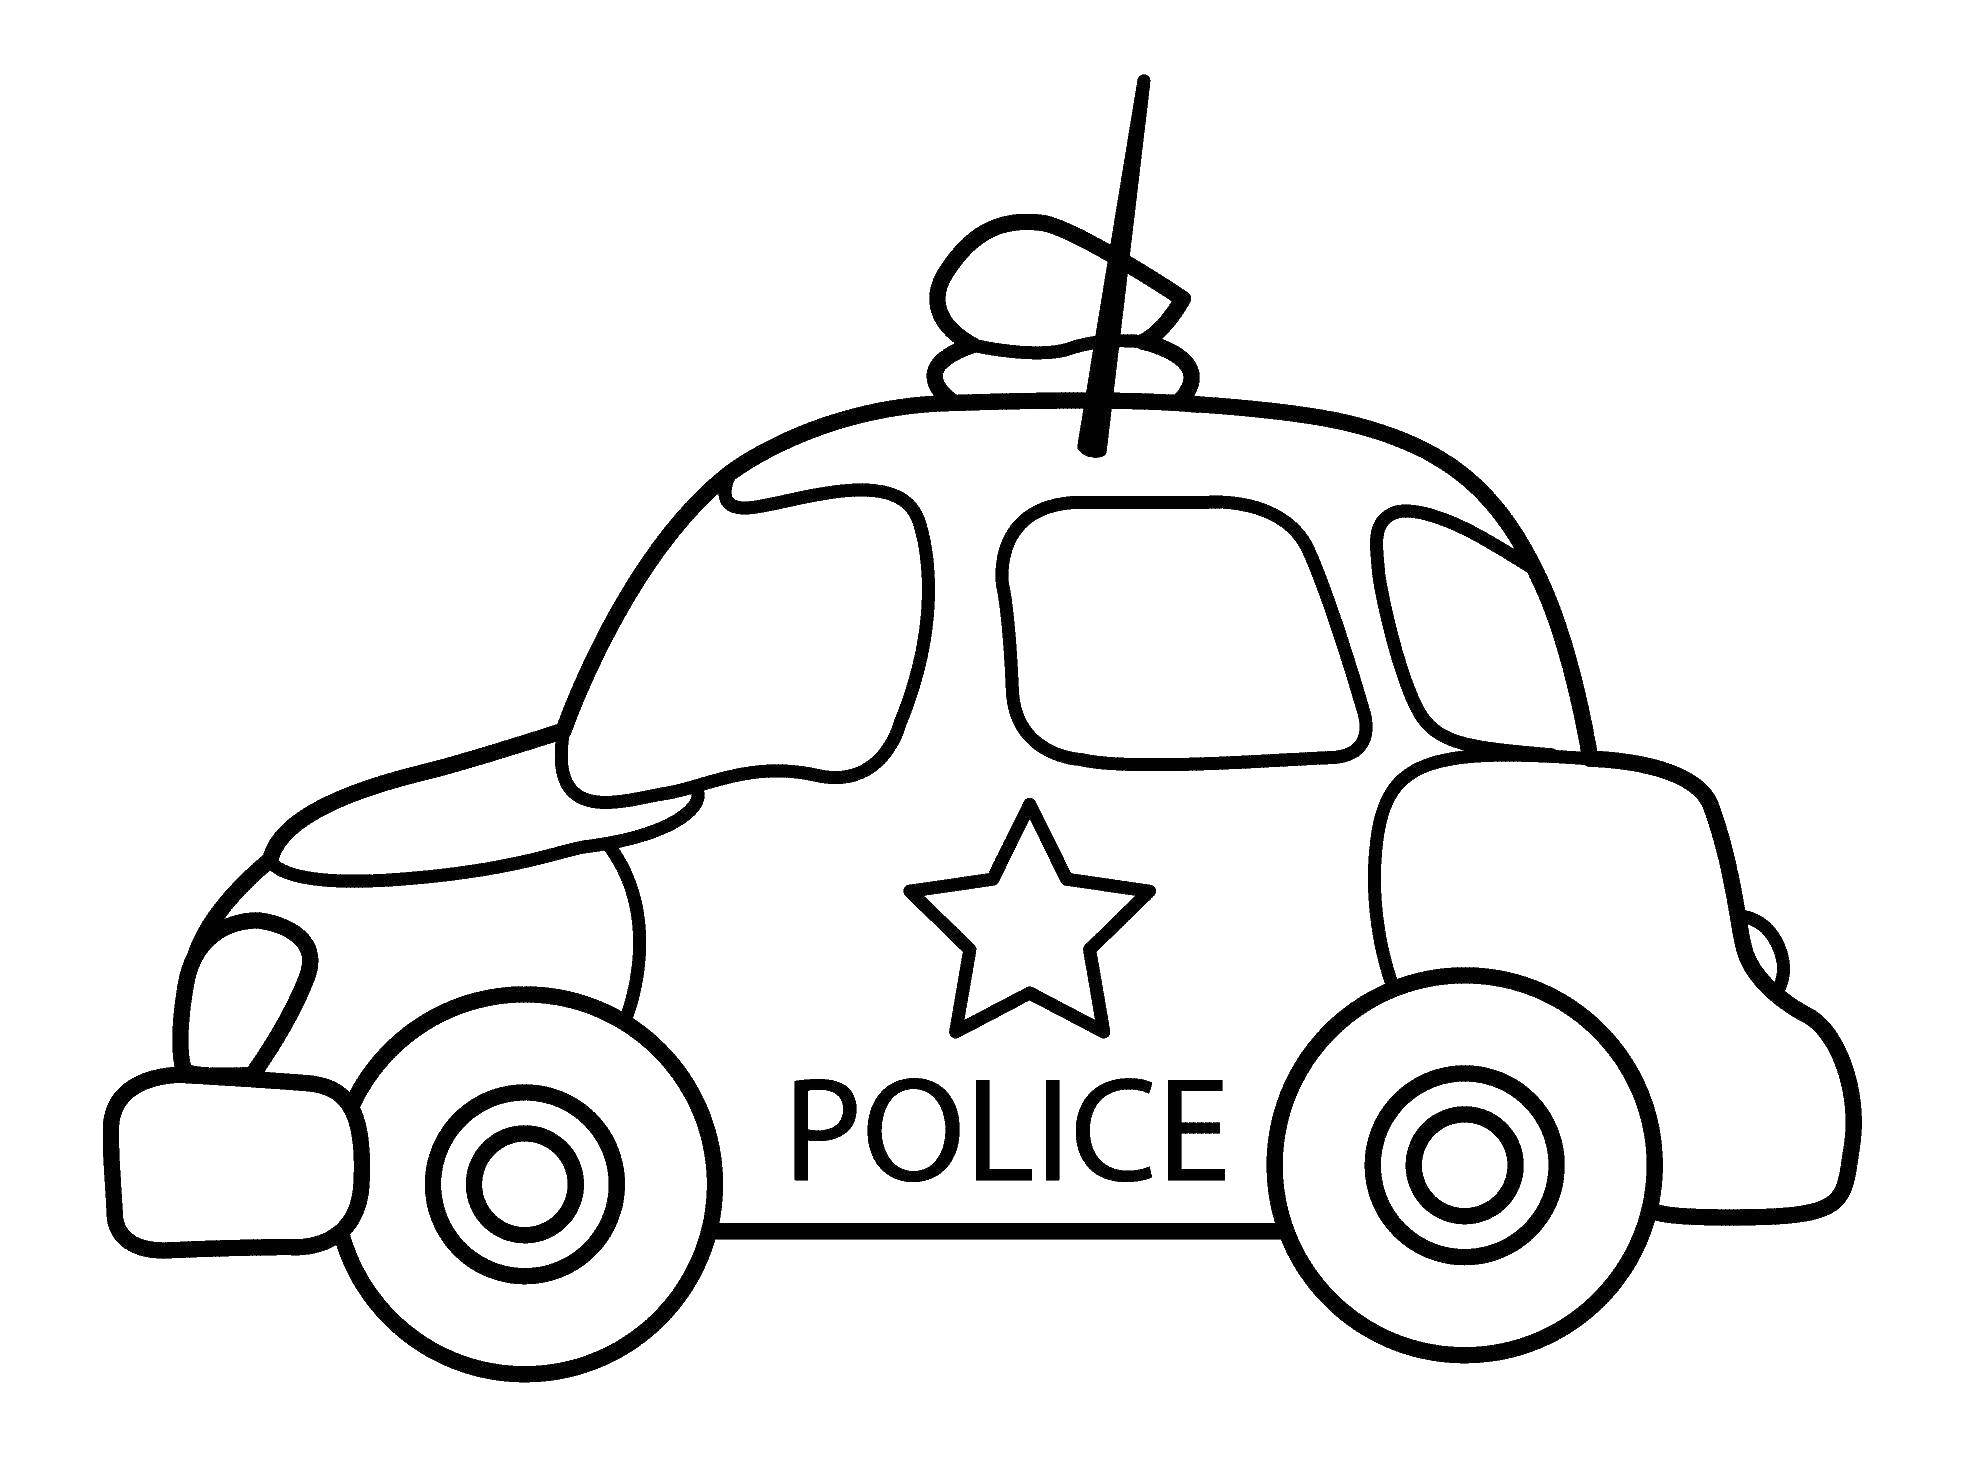 Coloring Little police car. Category Machine . Tags:  machine, police.